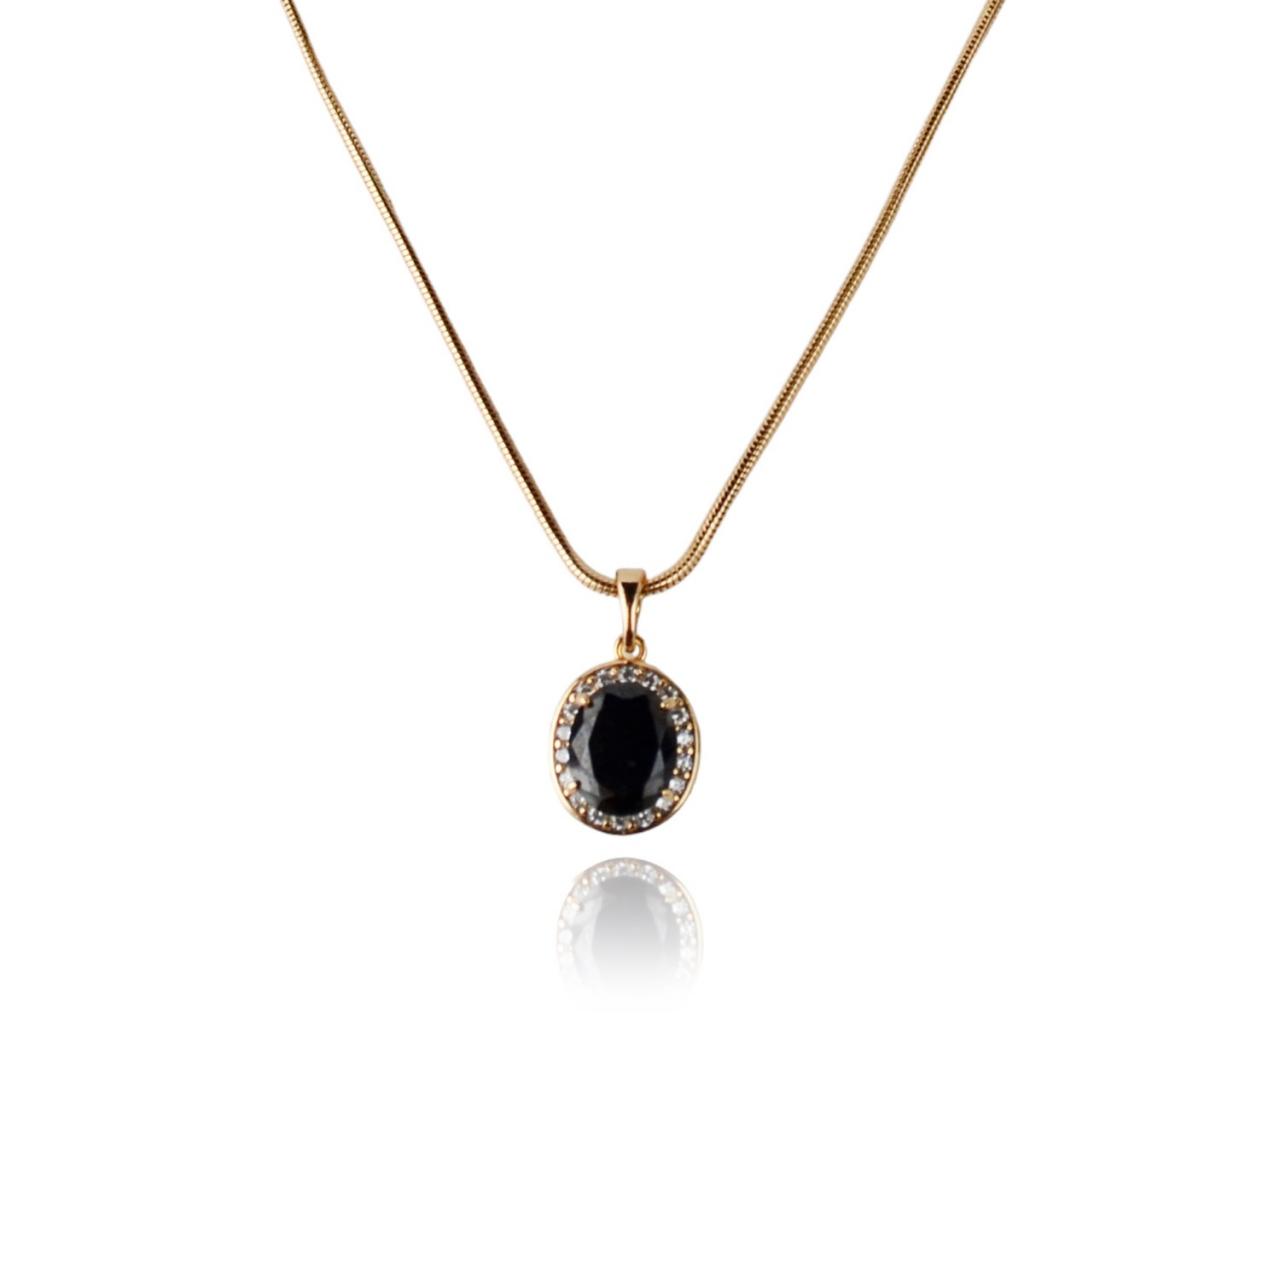 Gold Plated (not Real Gold) Necklace For Women With Black Pendant | Maritavita | Uk13